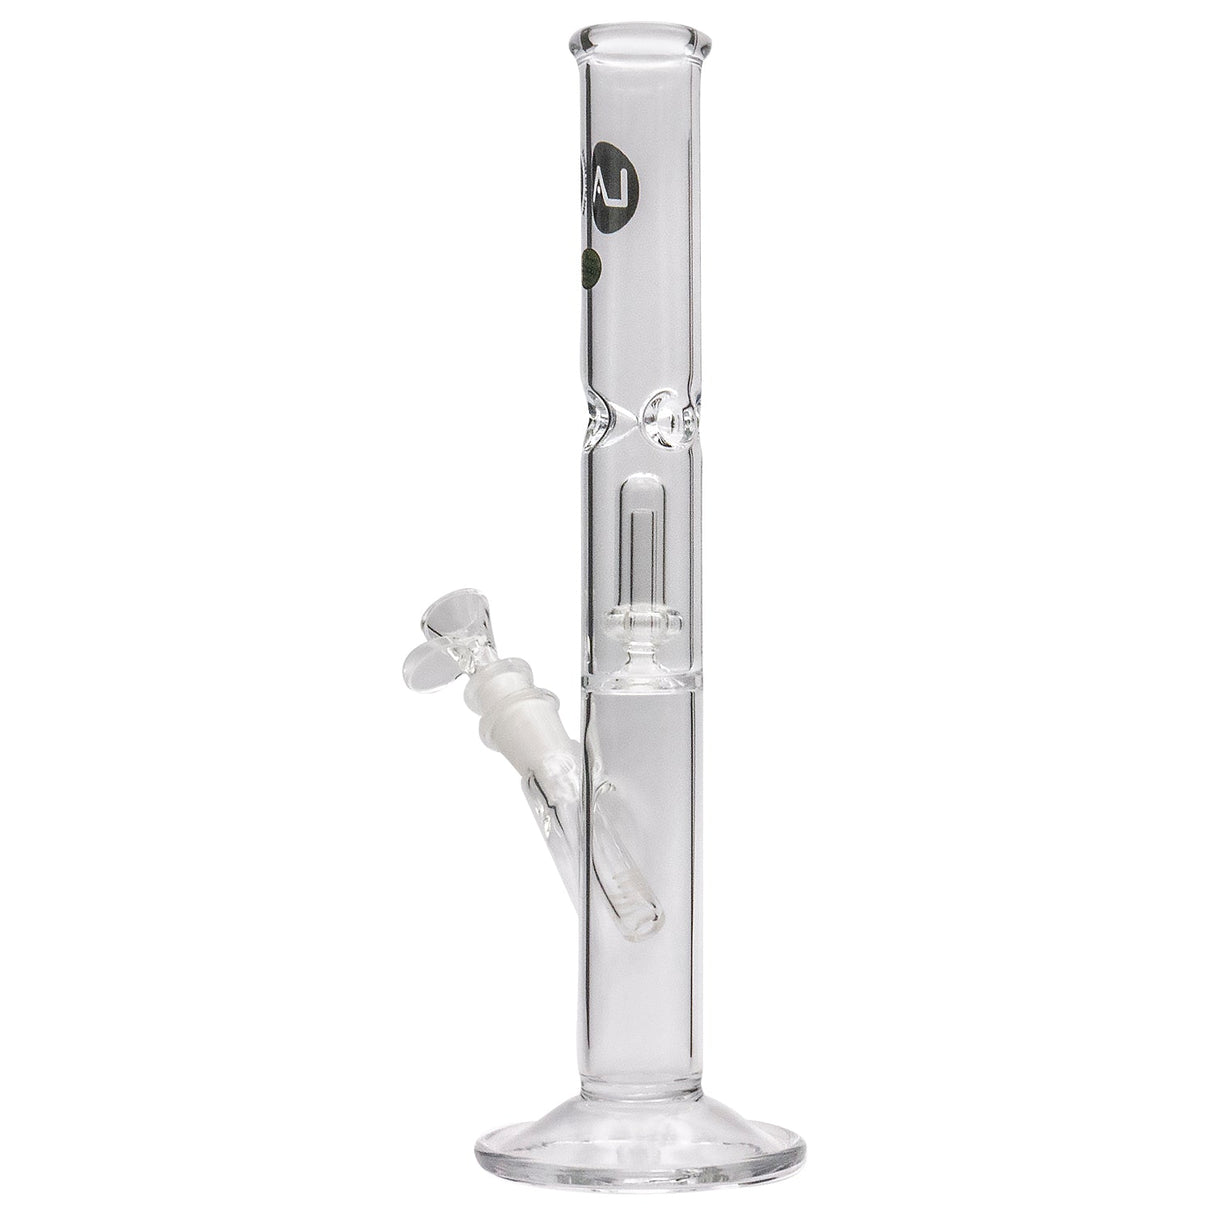 LA Pipes Straight Bong with Showerhead Perc, Clear Borosilicate Glass, Front View on White Background